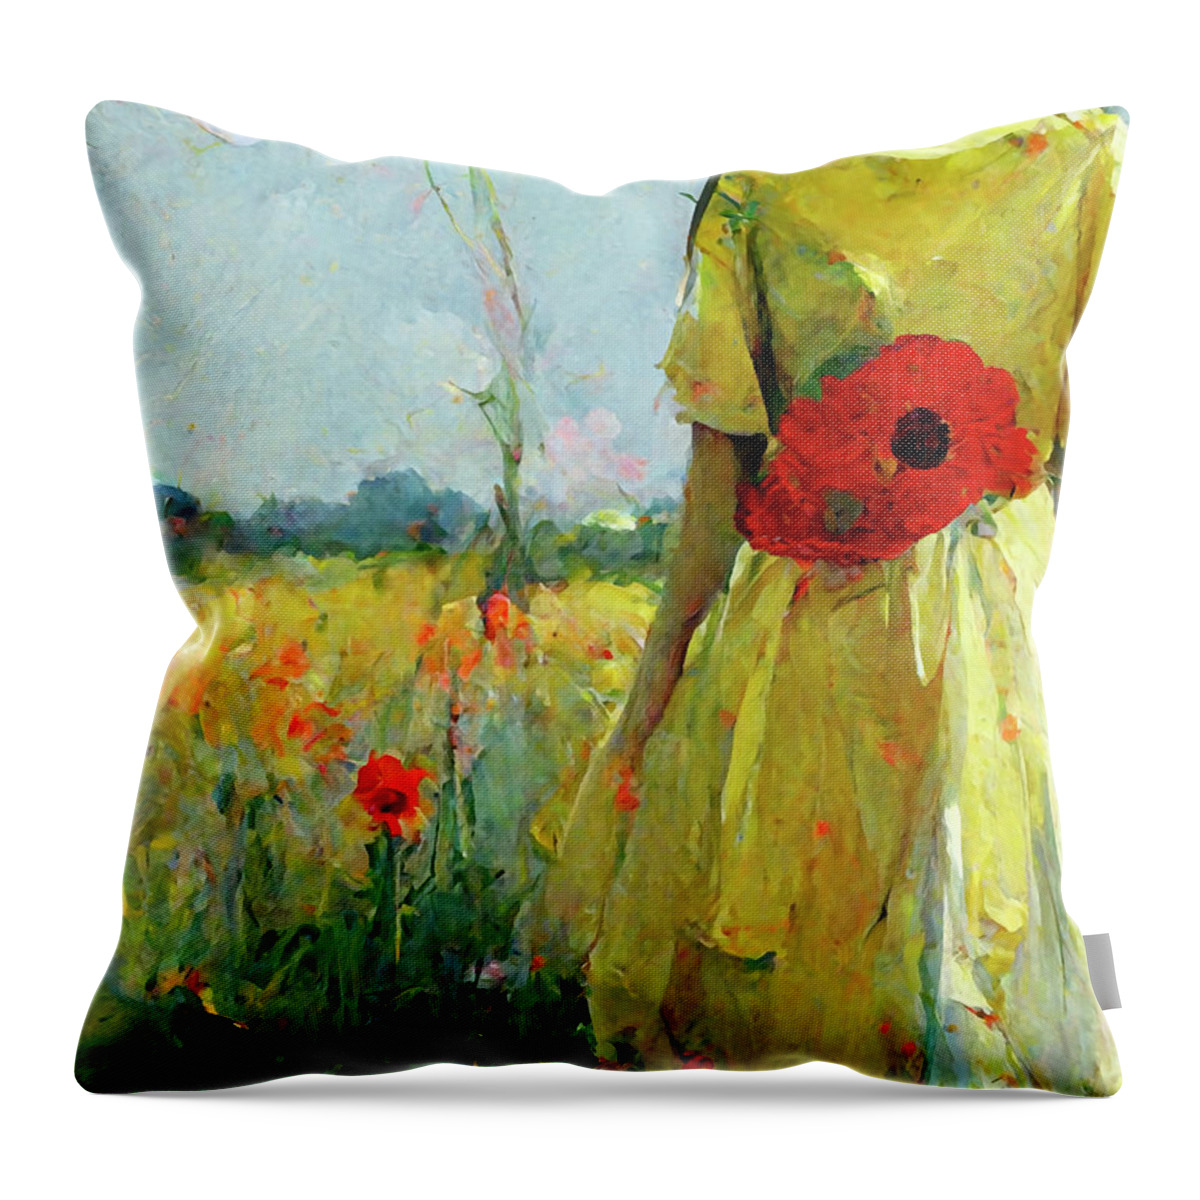 Denise Throw Pillow featuring the digital art Girl in Yellow Dress by Denise Deiloh